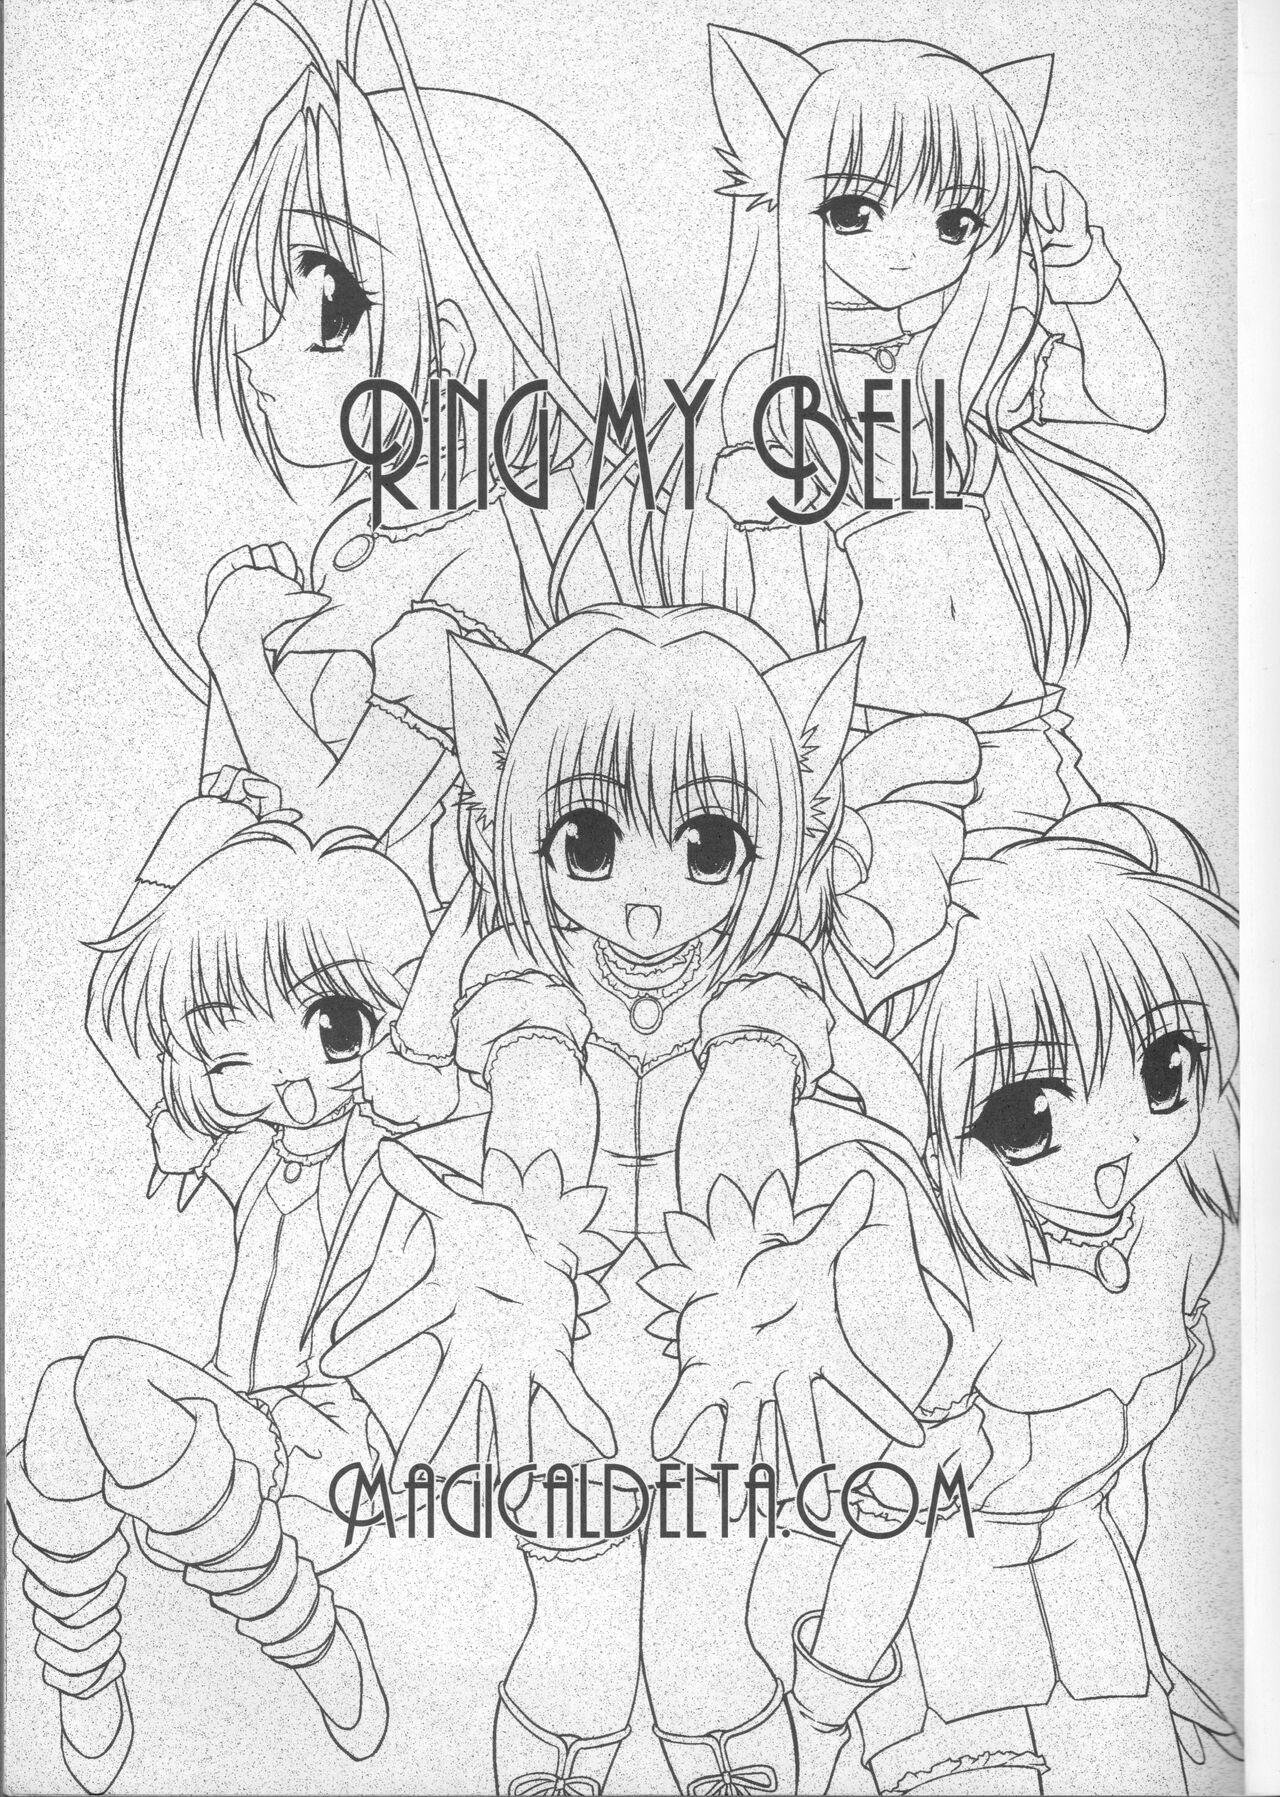 Stepson Ring My Bell - MAGICALDELTA.COM - Tokyo mew mew | mew mew power Monster Cock - Picture 2